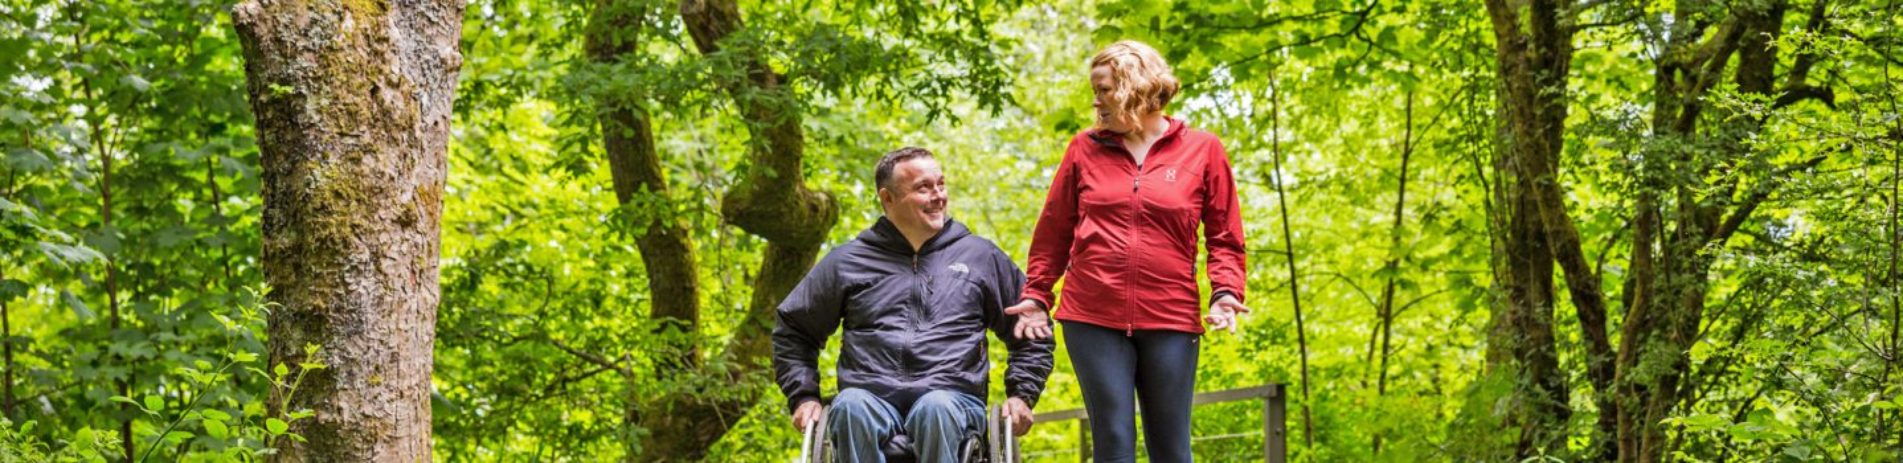 man-in-wheelchair-jeans-and-dark-jacket-accompanied-by-woman-in-red-sports-top-on-park-path-forest-canopy-behind